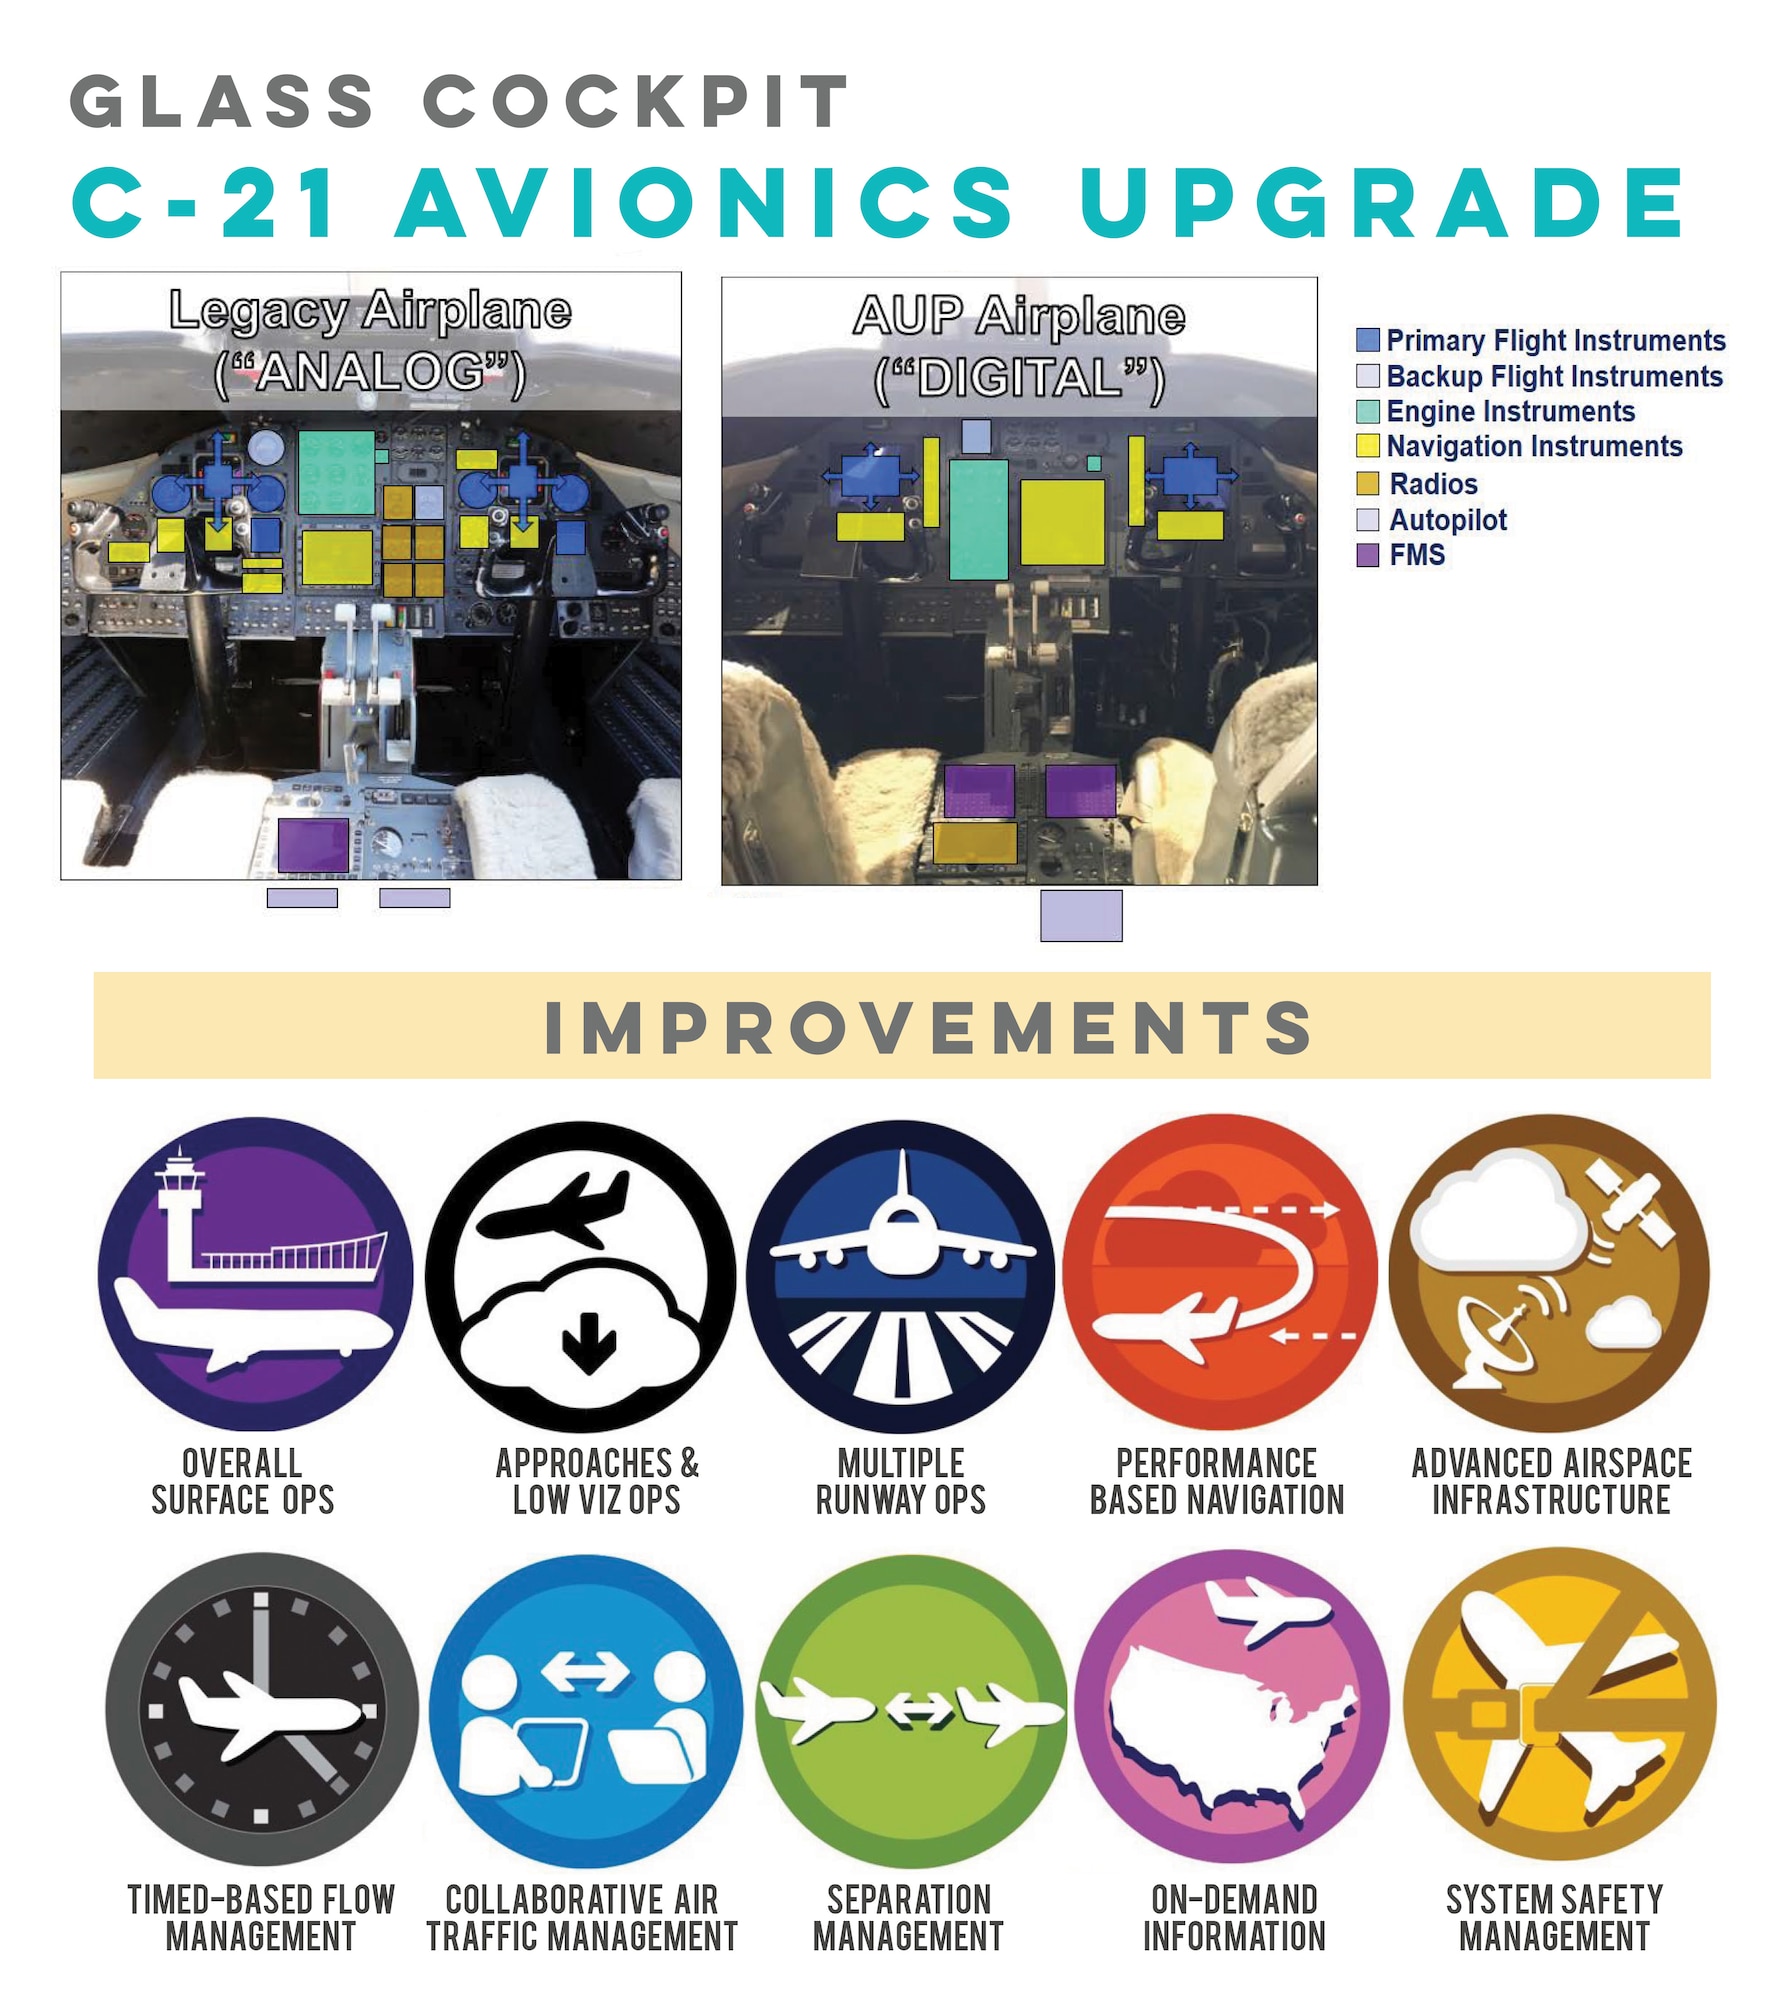 After 35 years of C-21 operations at Scott Air Force Base, Illinois, the aircraft has undergone a $38 million avionics upgrade. The new avionics and communications suites expand the aircraft’s reach, effectiveness, and capability, and come in time to meet Federal Aviation Administration’s 2020 equipment mandate to keep increasingly congested airspace safe.